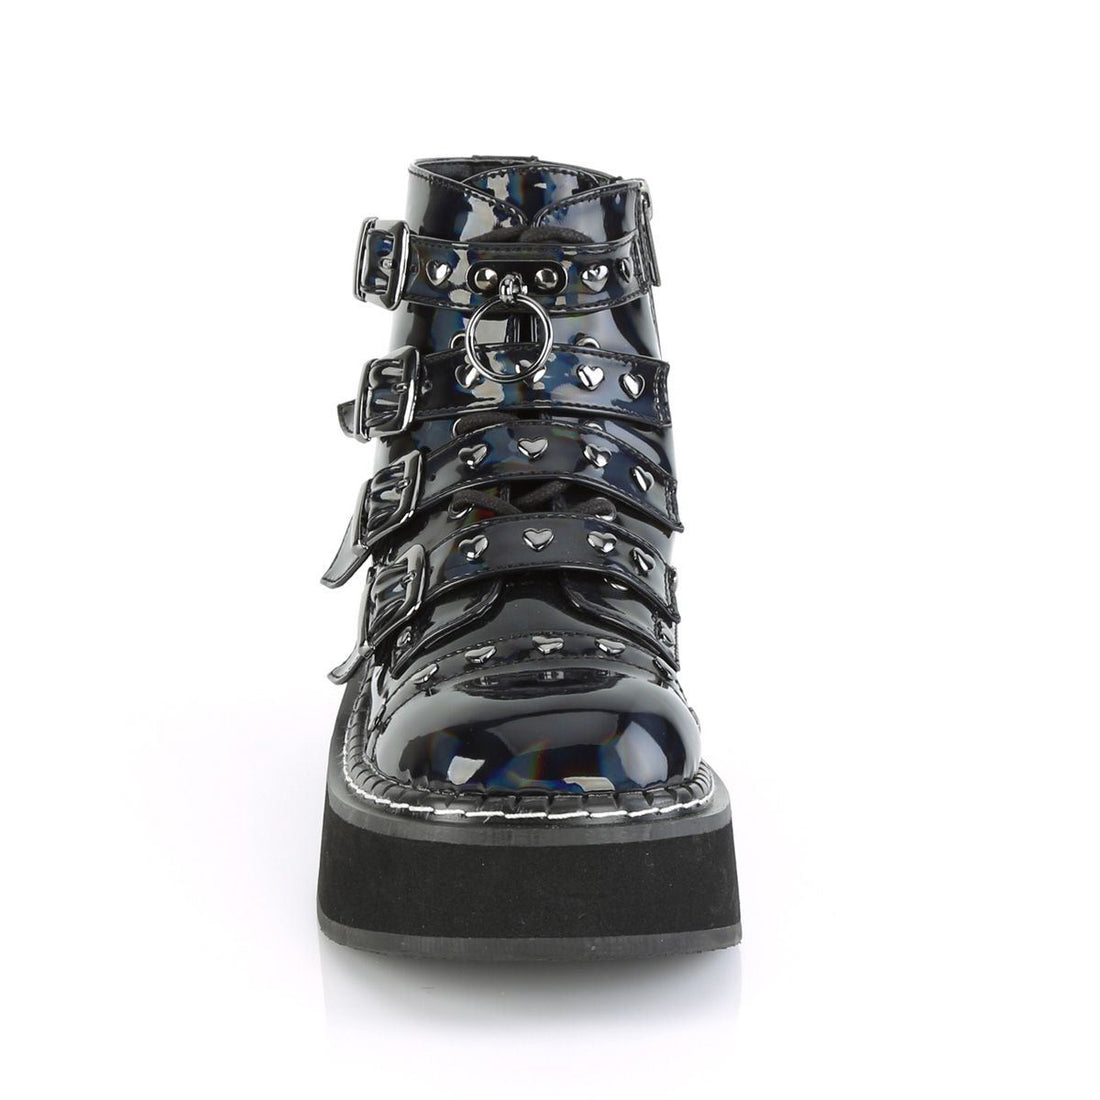 Demonia Emily 315 Black Holographic Studded Ankle Boots - Upperclass Fashions 